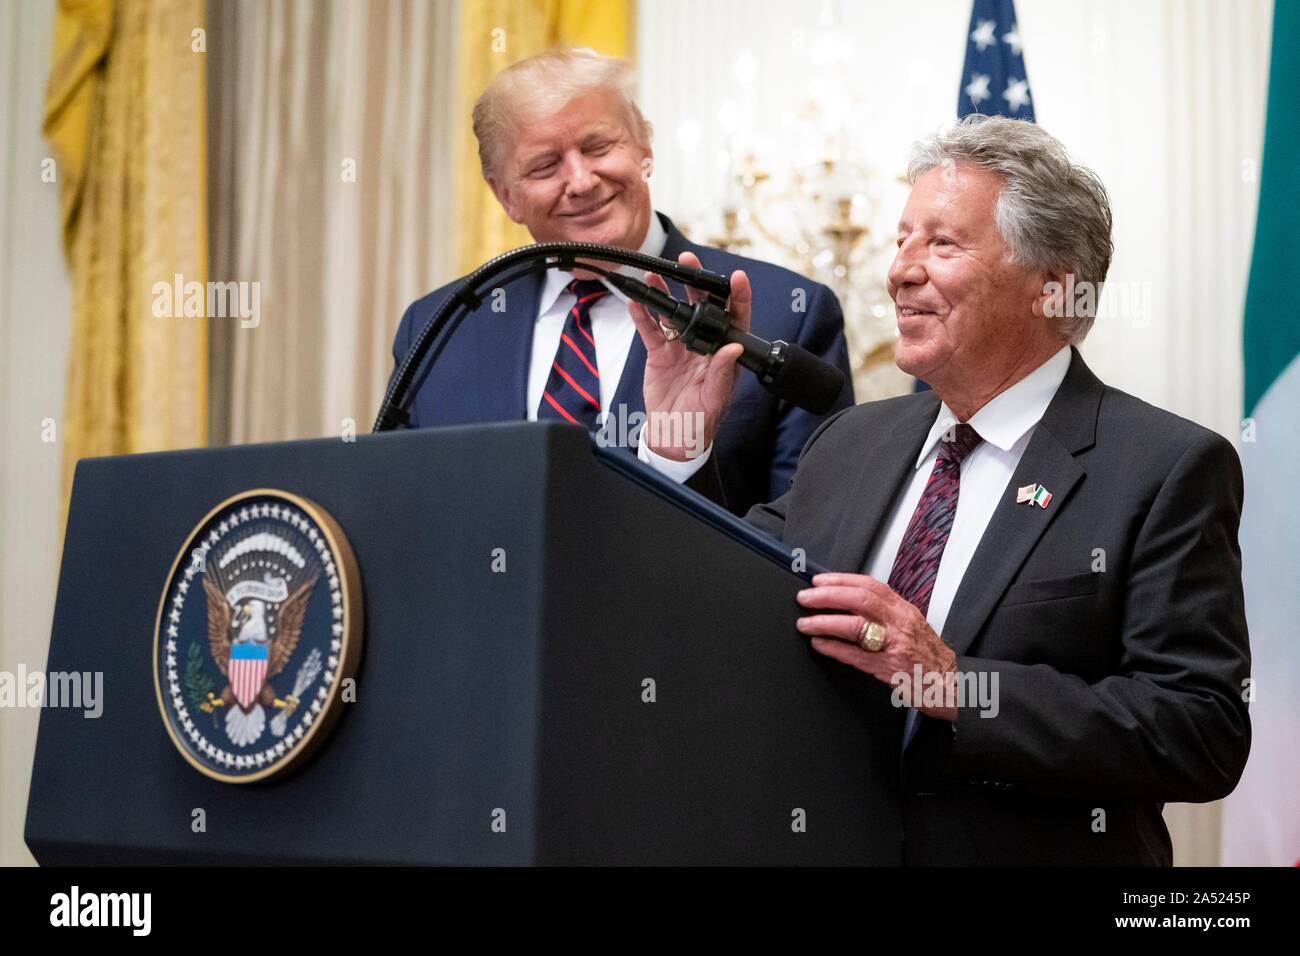 Washington, United States of America. 16 October, 2019. U.S President Donald Trump, left, smiles as he welcomes legendary race car driver Mario Andretti to the podium during a reception in honor of Italian President Sergio Mattarella in the East Room of the White House October 16, 2019 in Washington, DC. Credit: Tia Dufour/White House Photo/Alamy Live News Stock Photo